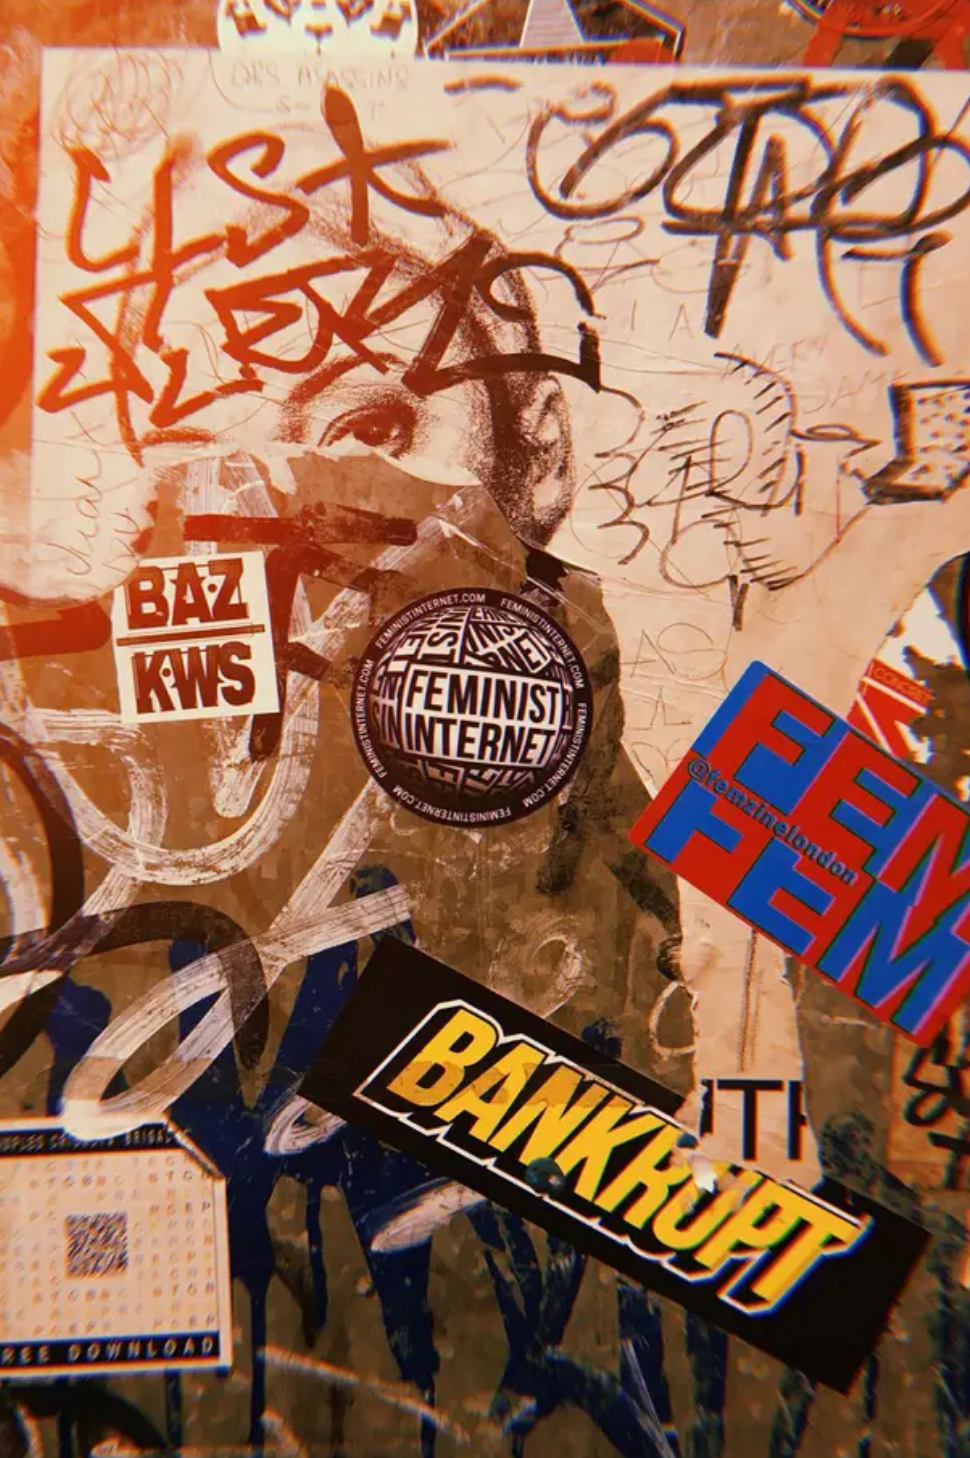 Photo of a metal wall that one would find in a techno club bathroom filled with scribbles of graffiti, old and ripped up posters, and stickers pasted all over.